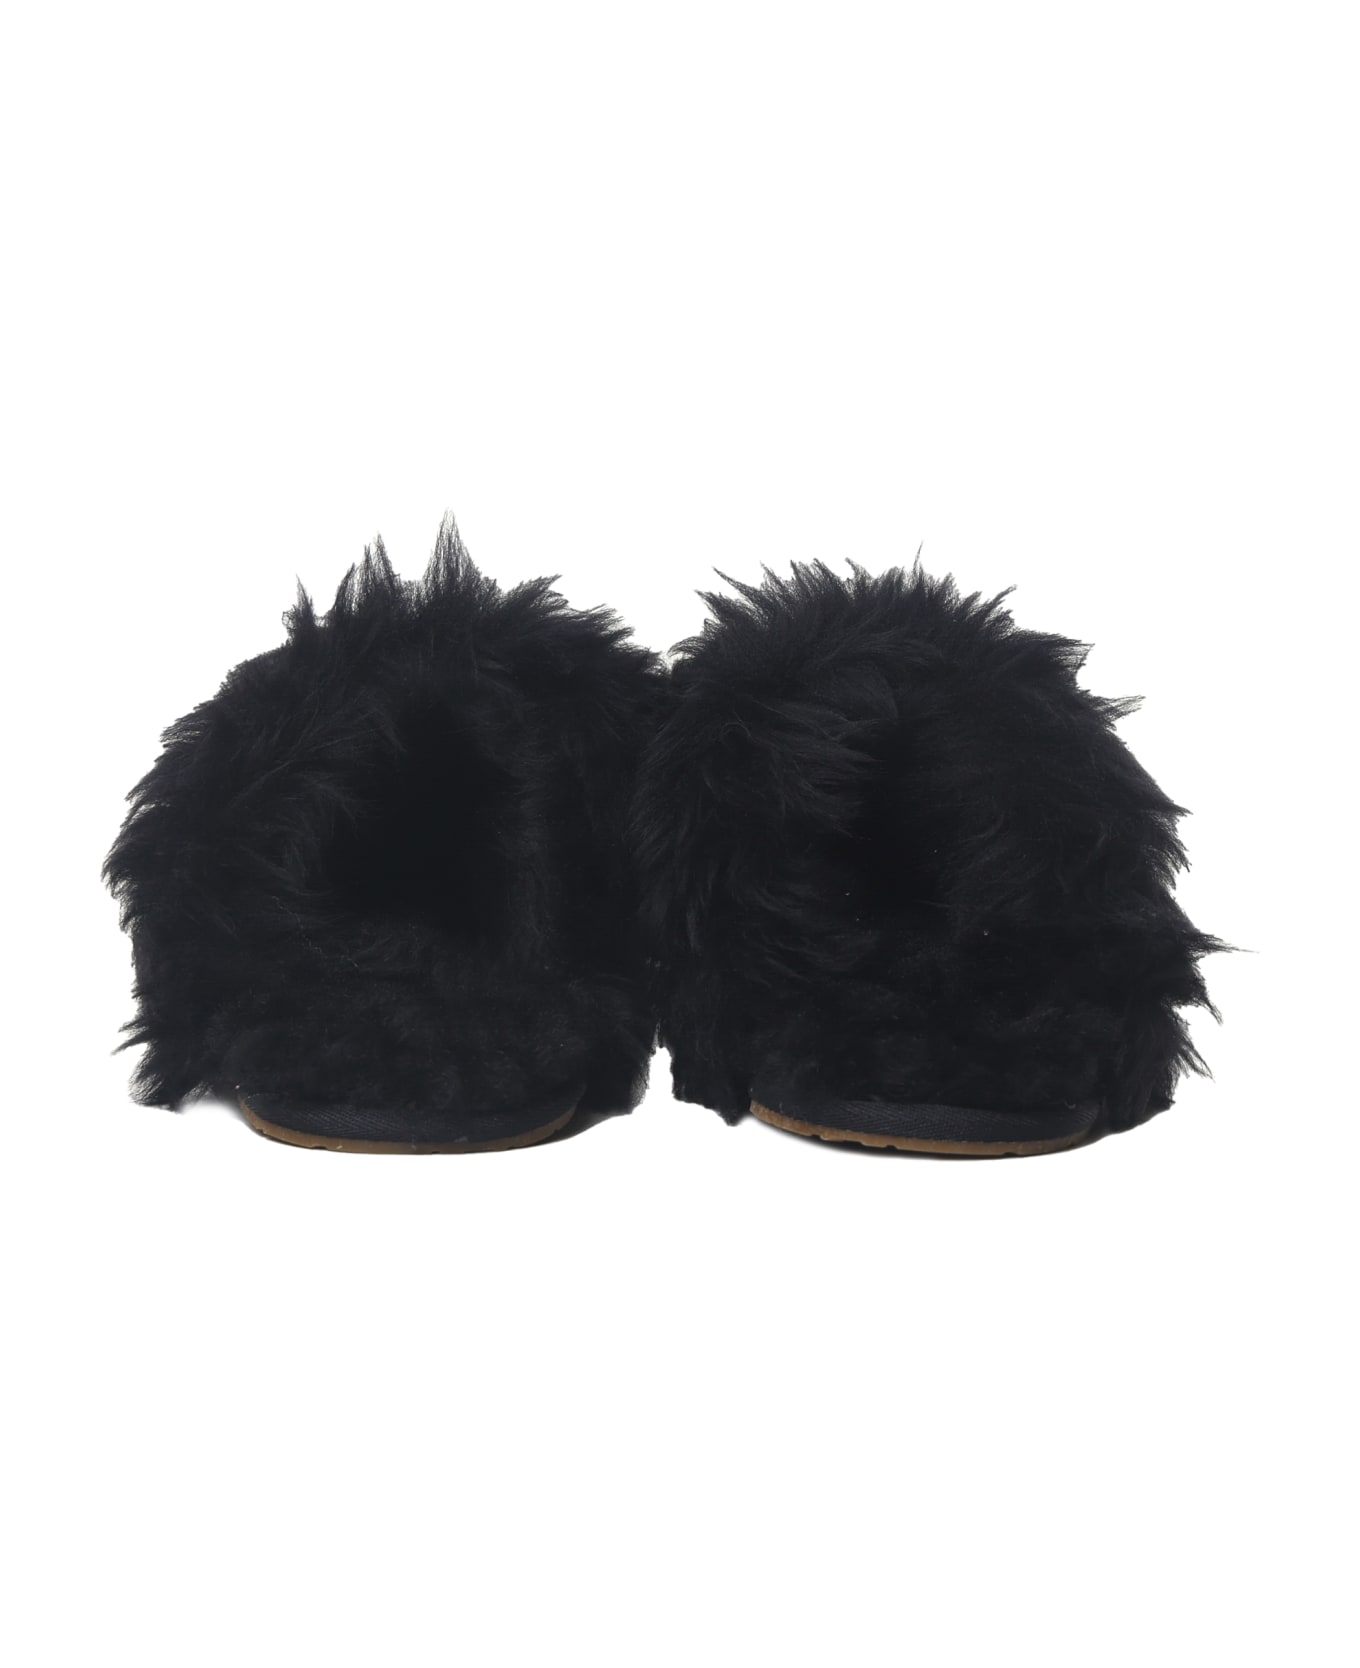 UGG Scuff Sis Slippers In Shearling With Fur Trim - Black